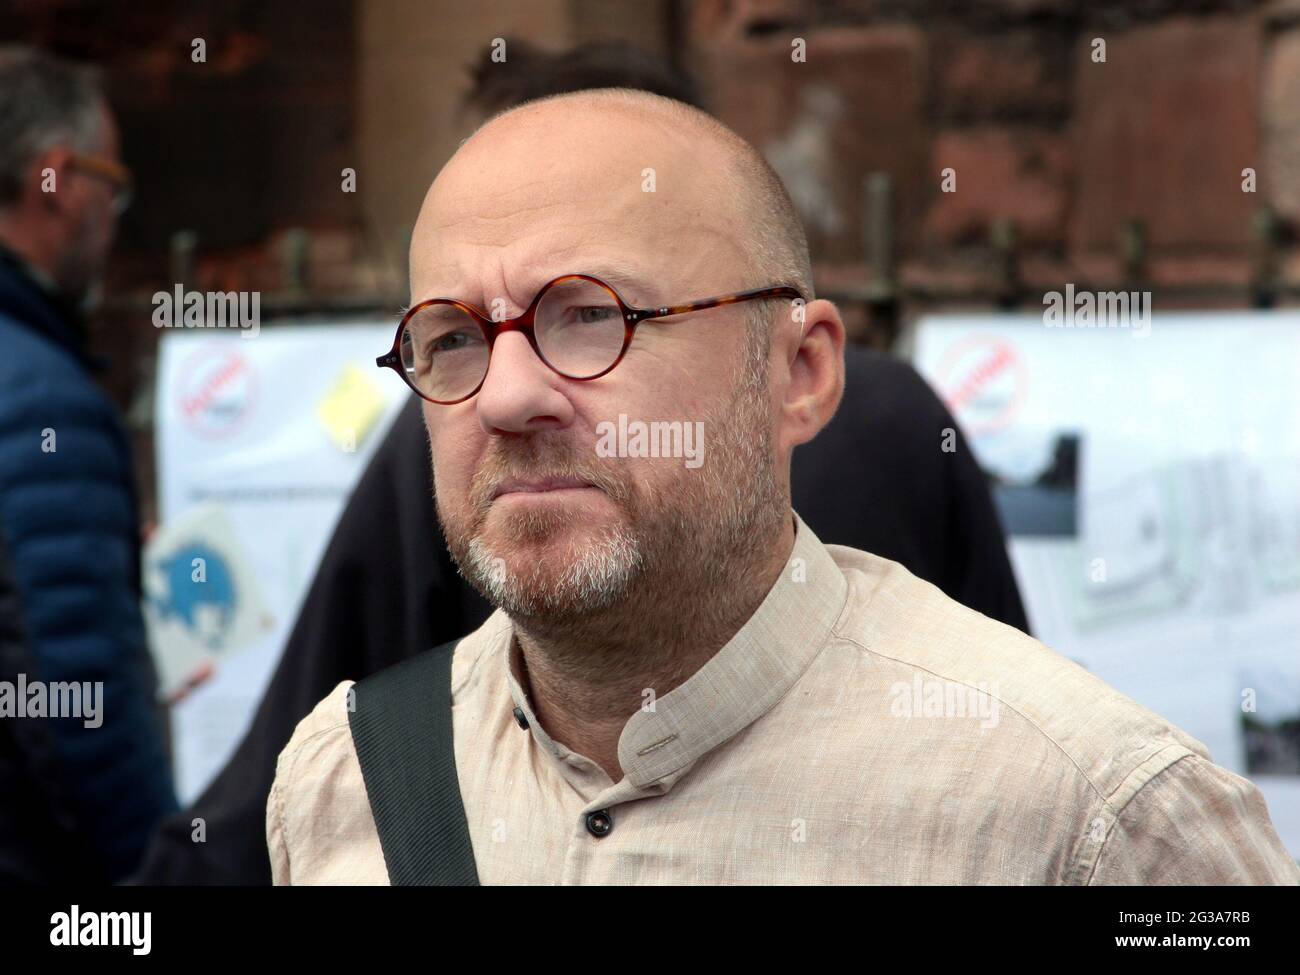 Patrick Harvie is a Scottish Politician who current serves in the Scottish Parliament as an MSP, Member of the Scottish Parliament, as a Green Party member and is the joint leader of the Green Party in Scotland. ALAN WYLIE/ALAMY© Stock Photo